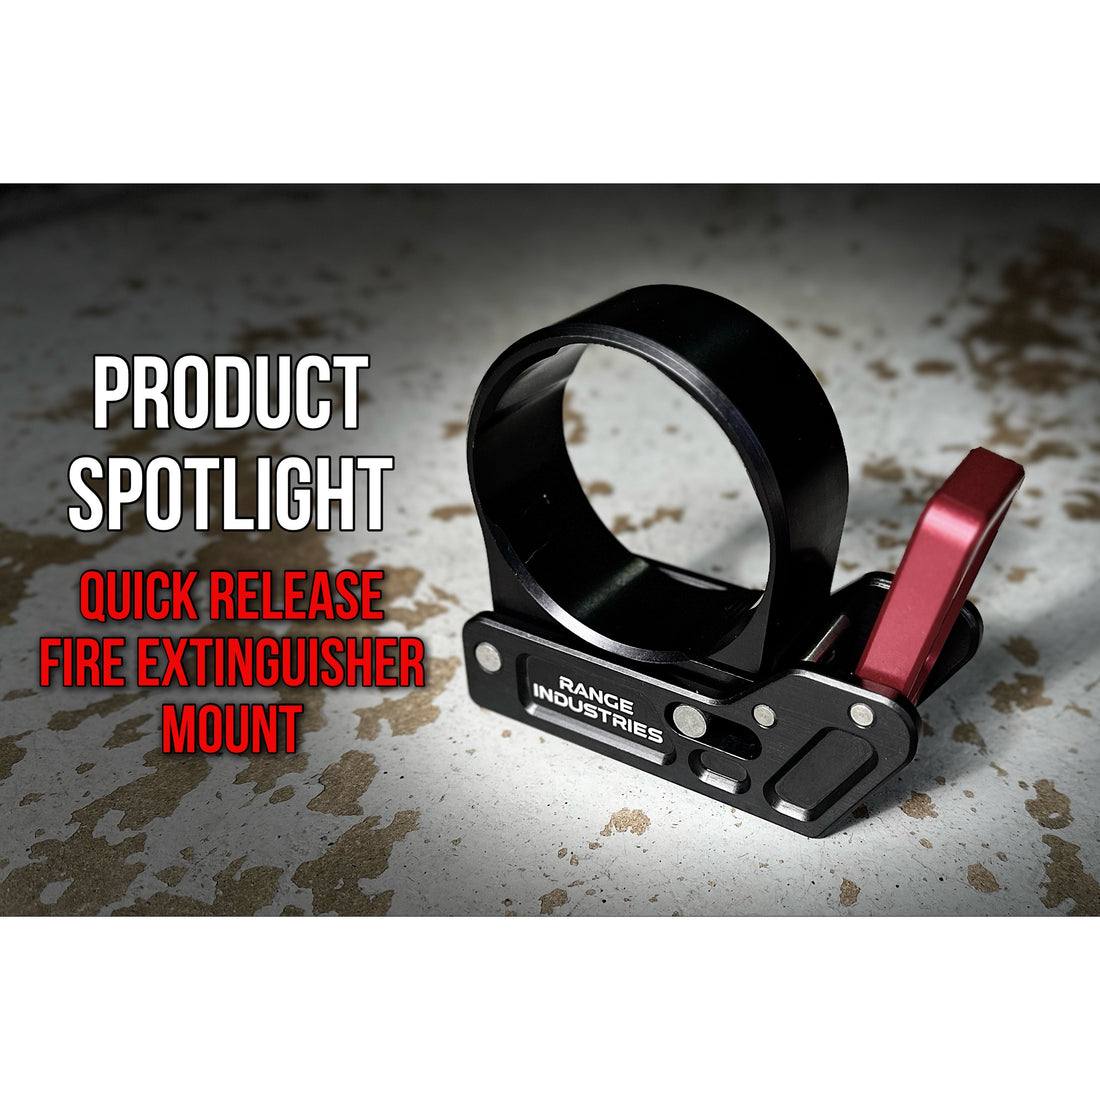 Range Review: Quick Release Fire Extinguisher Mount